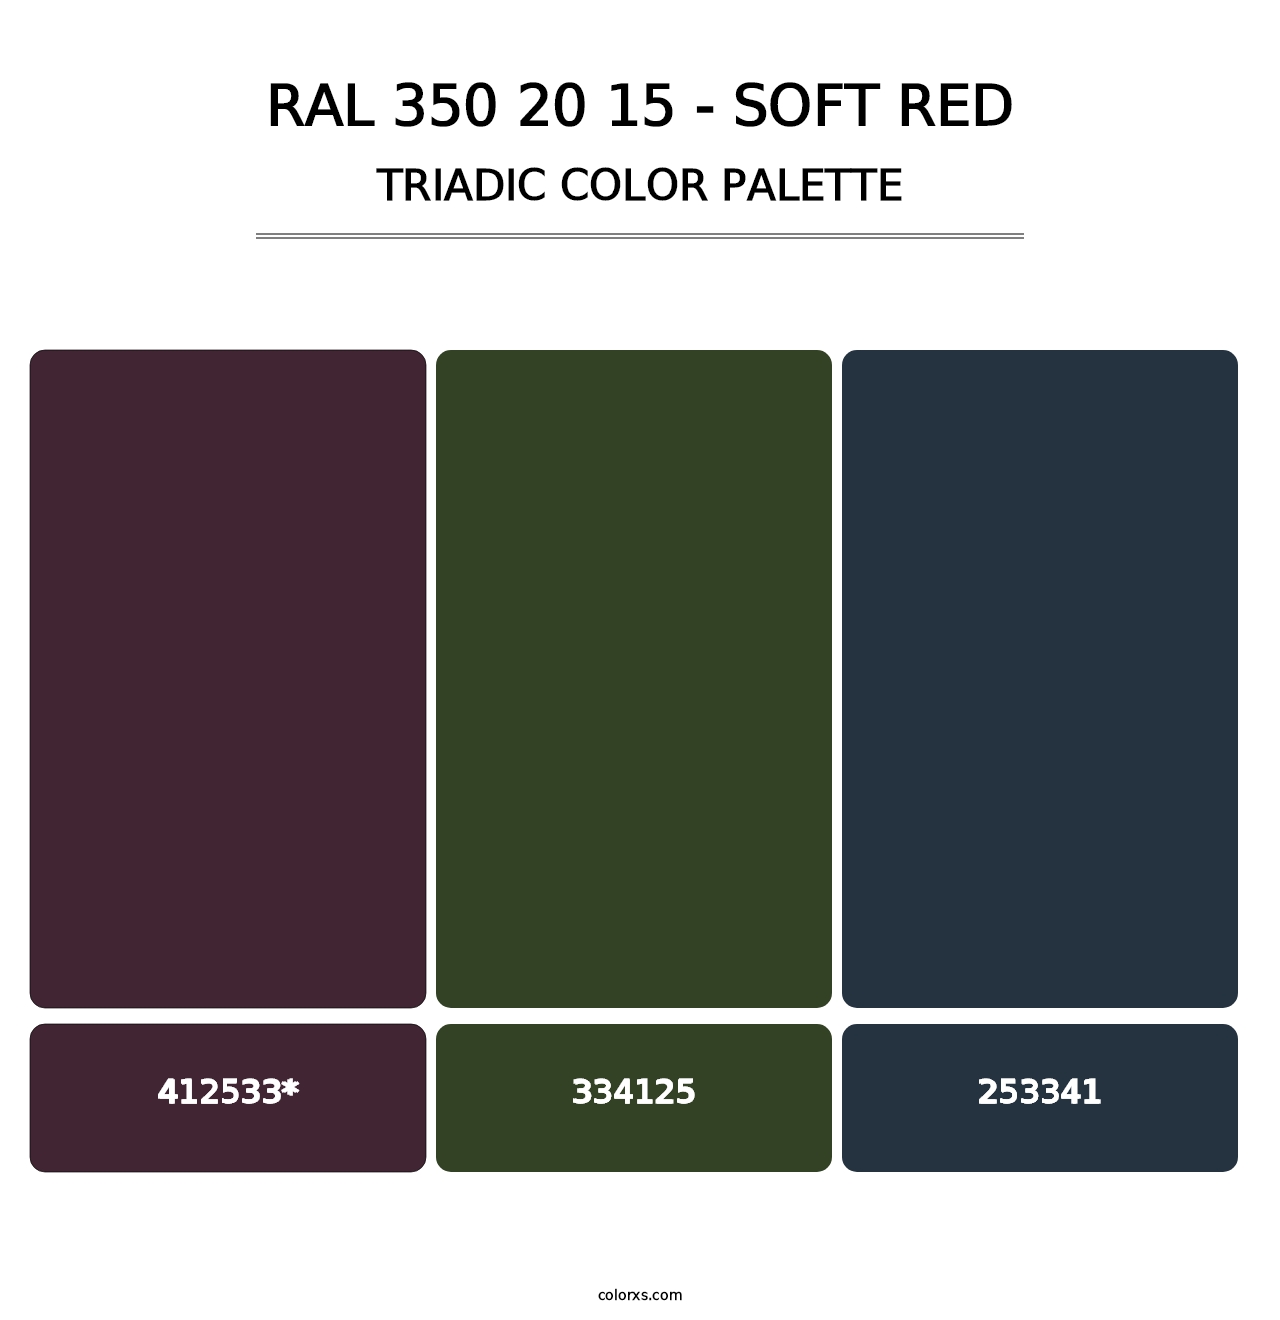 RAL 350 20 15 - Soft Red - Triadic Color Palette